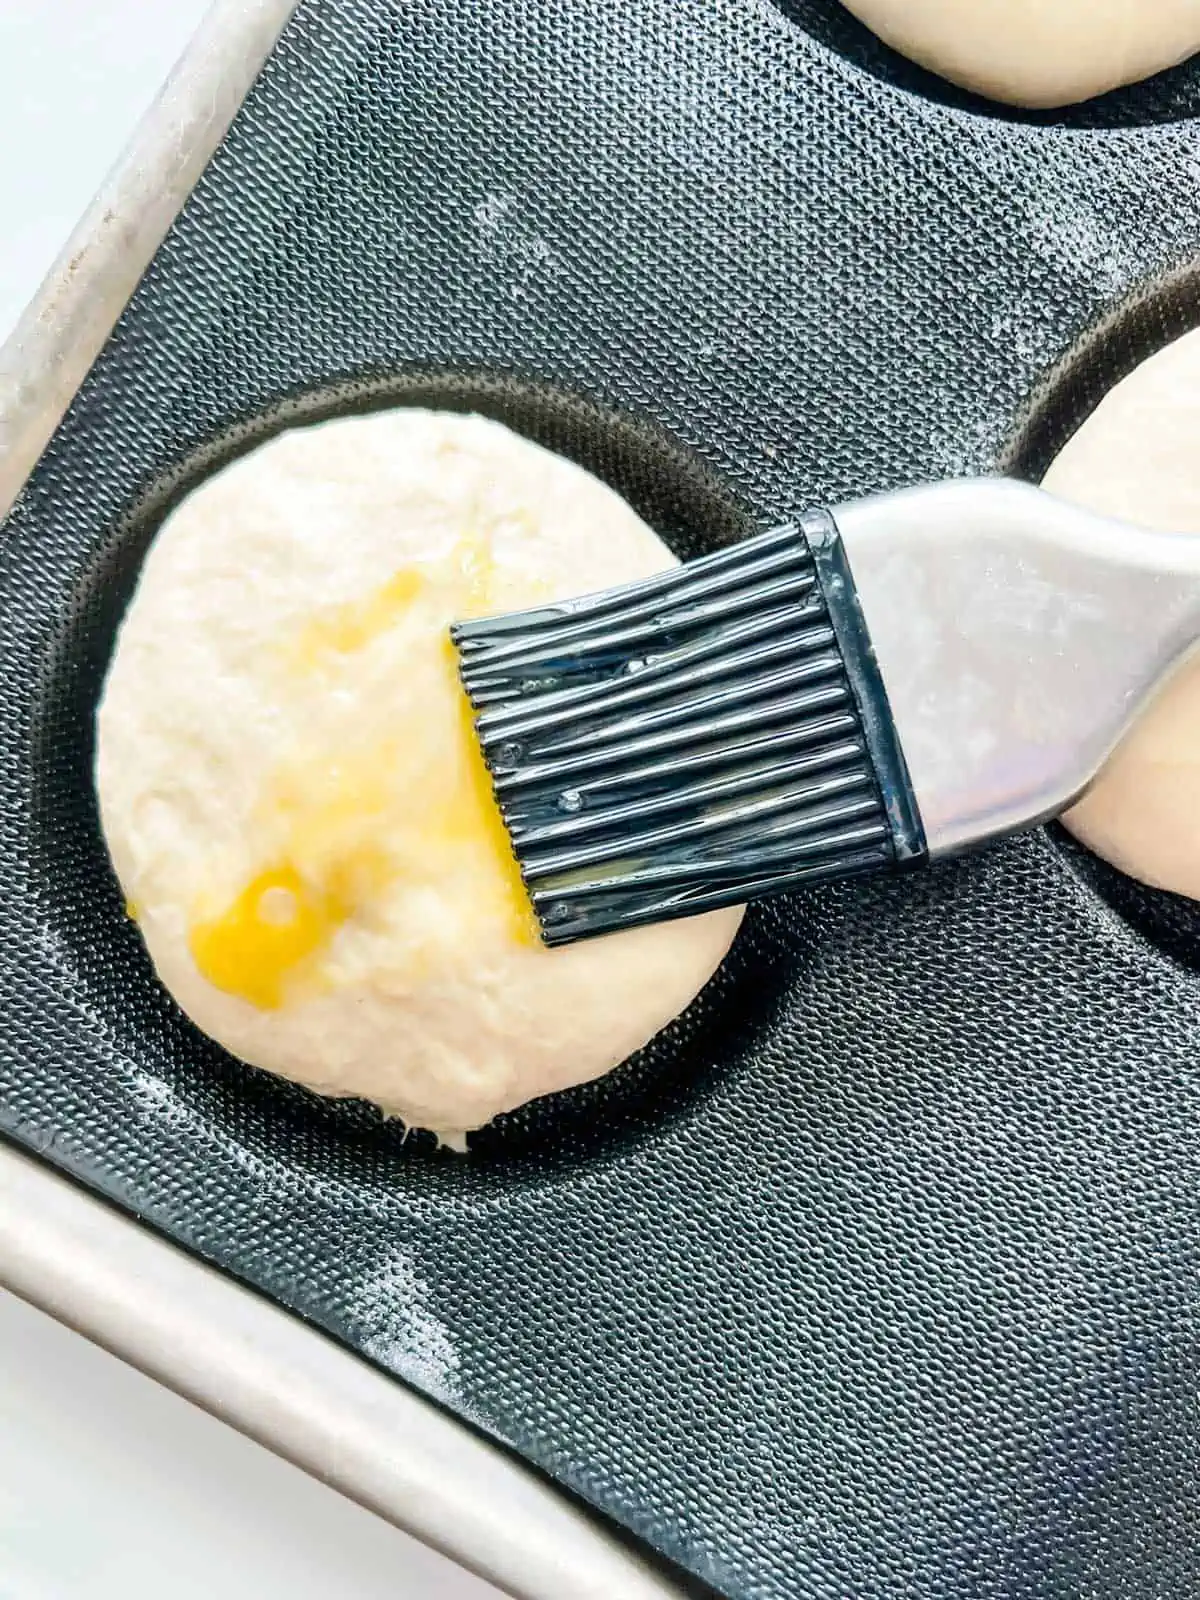 Photo of a burger bun being brushed with an egg wash.